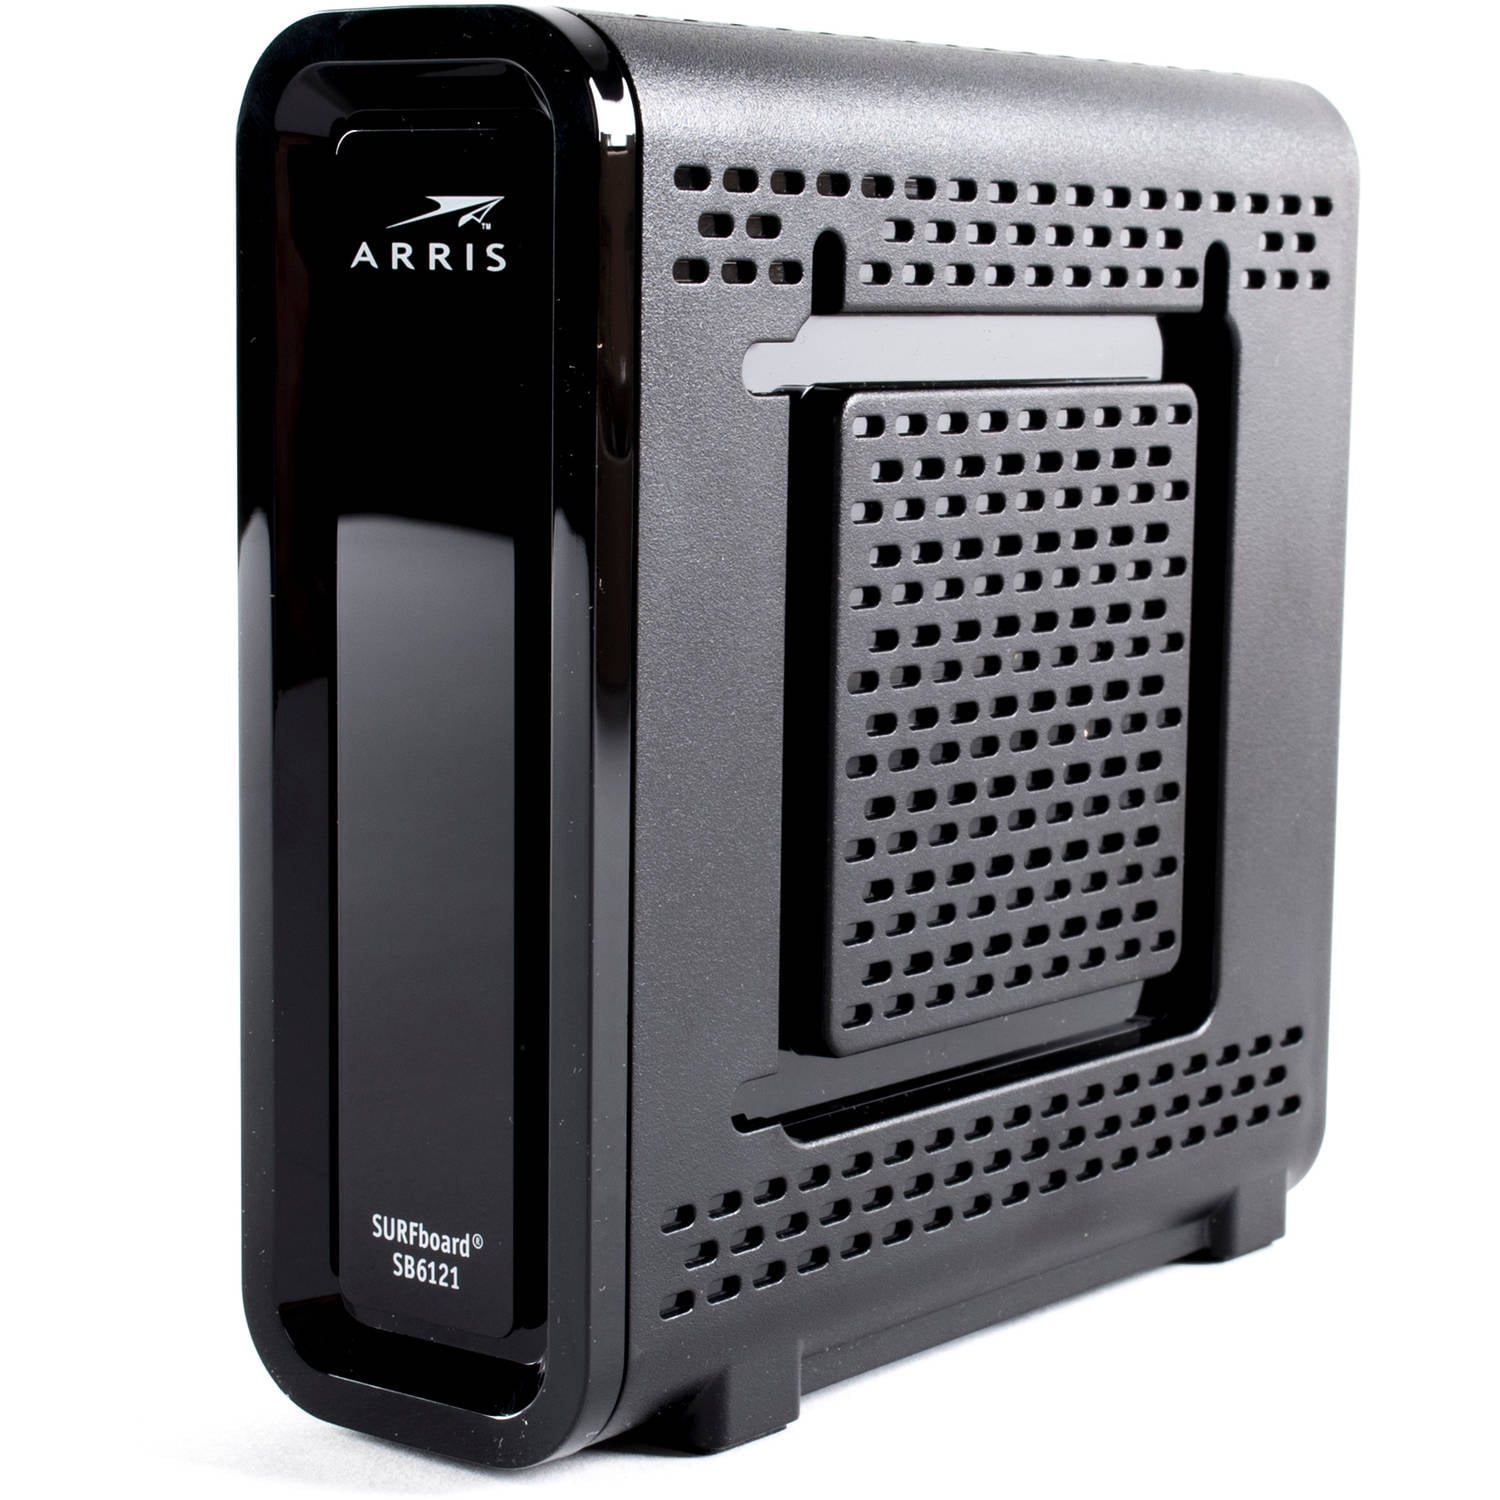 ARRIS SURFboard SB6183 DOCSIS 3.0 White Retail Packaging 16x4 Cable Modem 